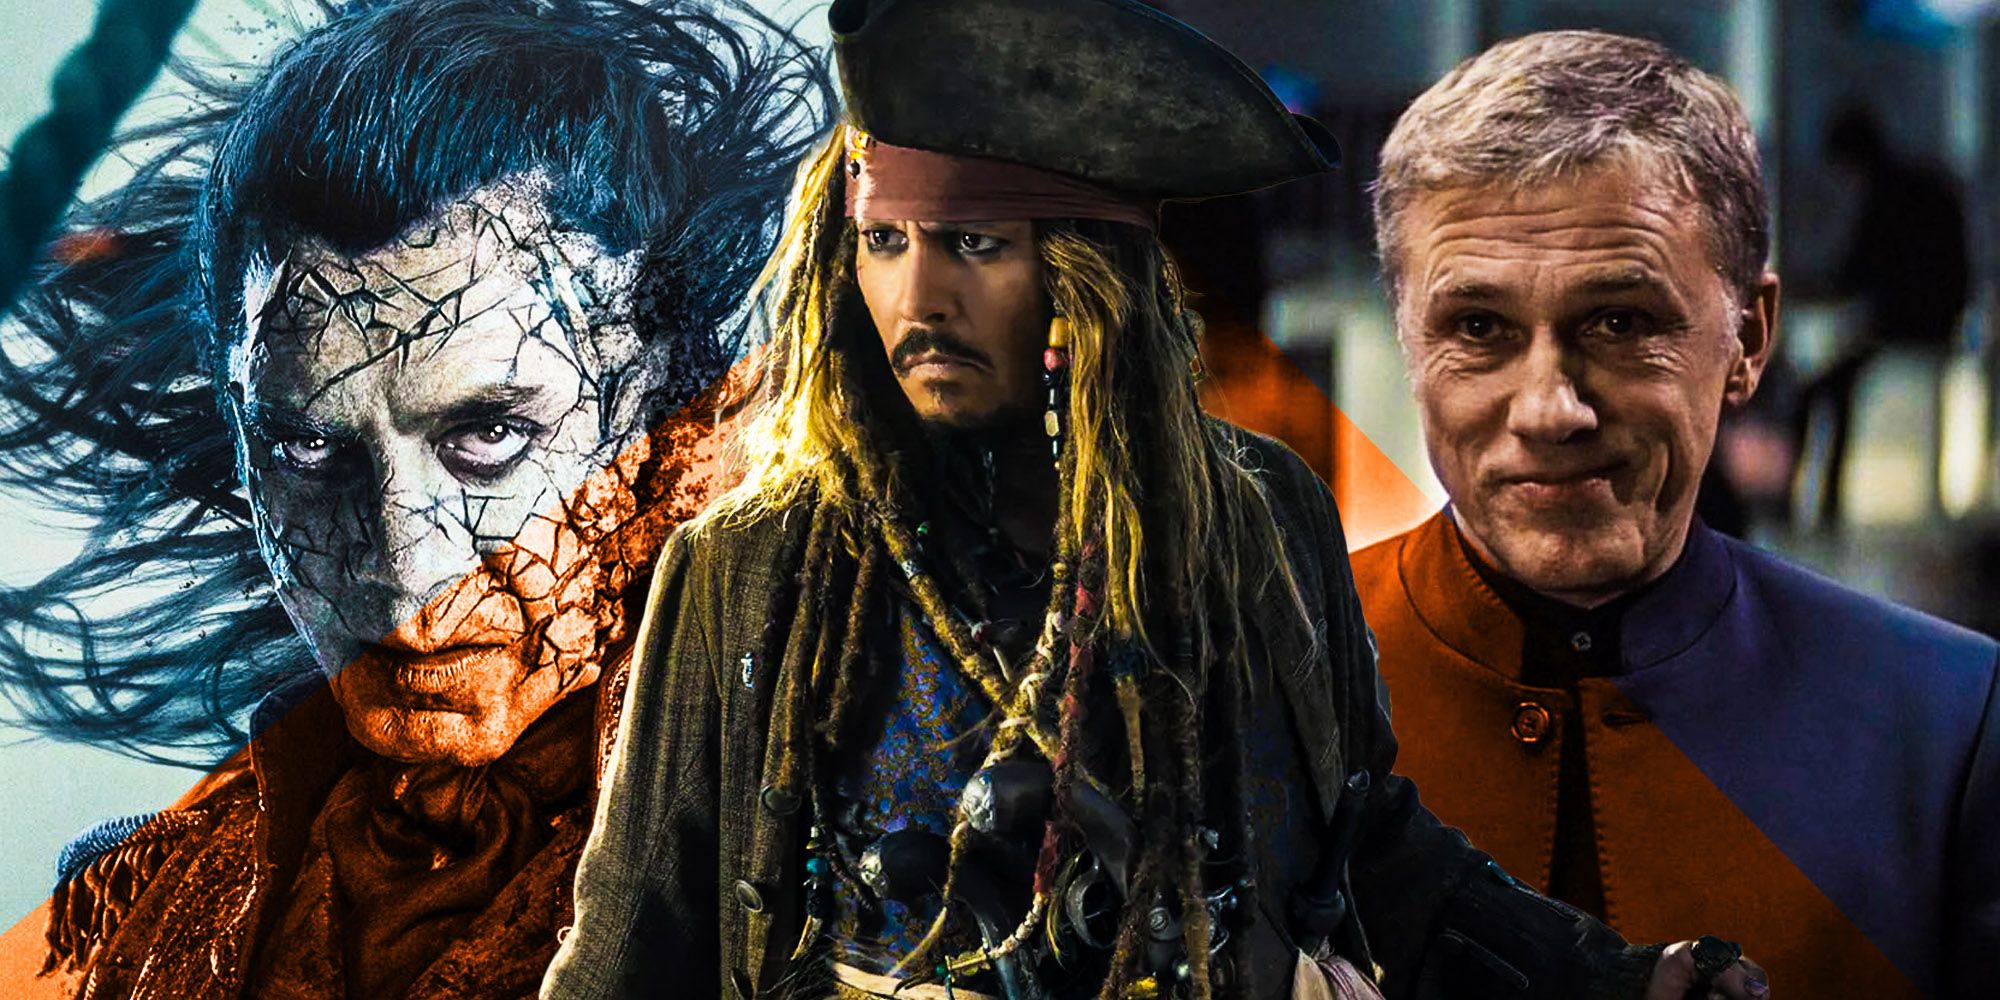 Pirates of the Caribbean instaling